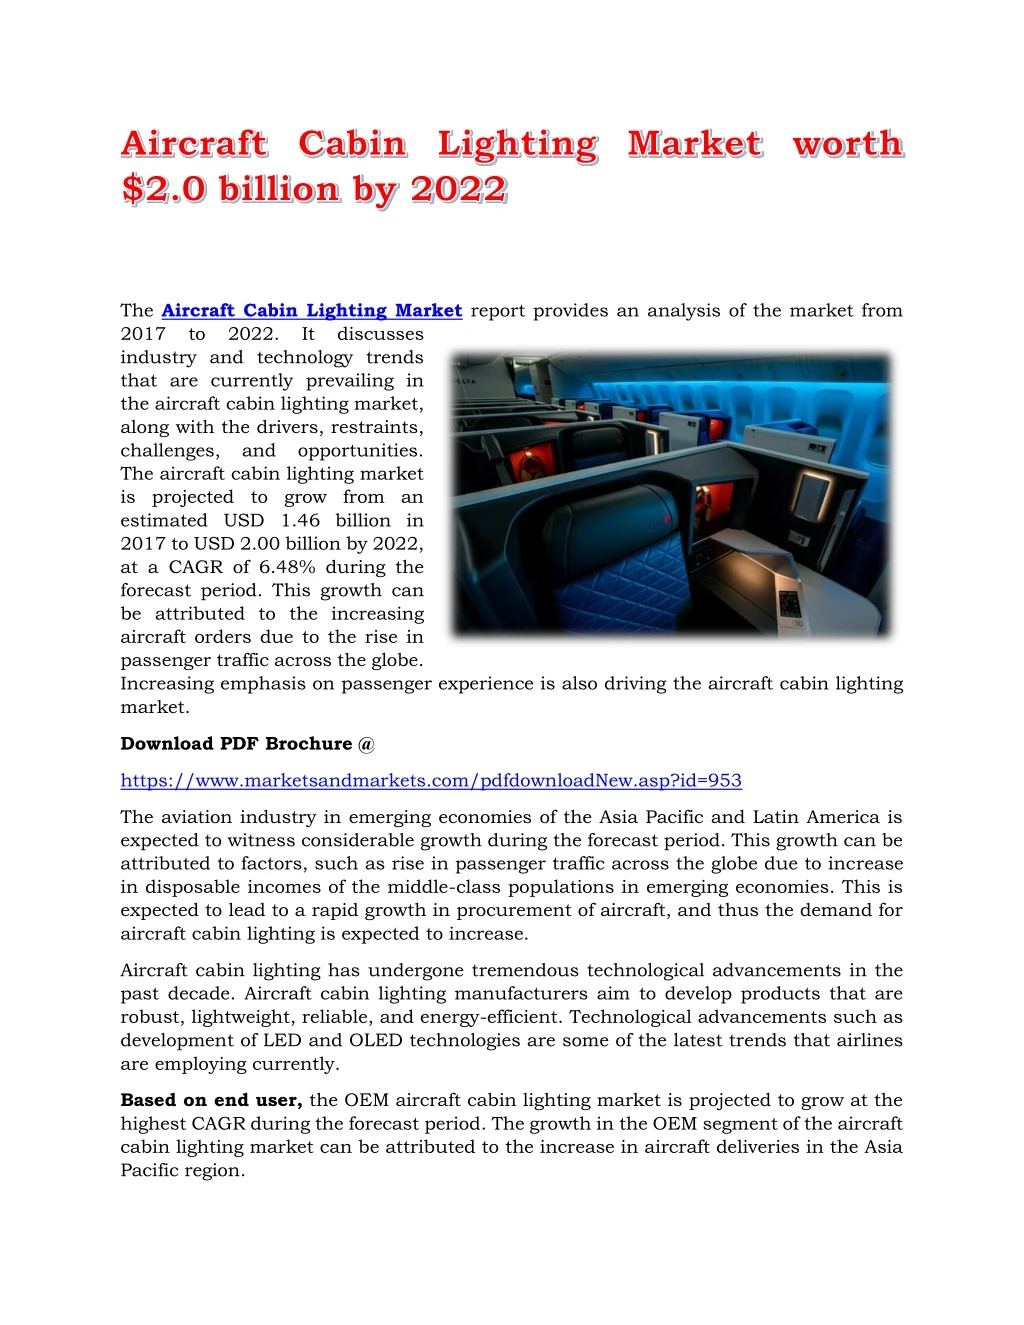 the aircraft cabin lighting market report